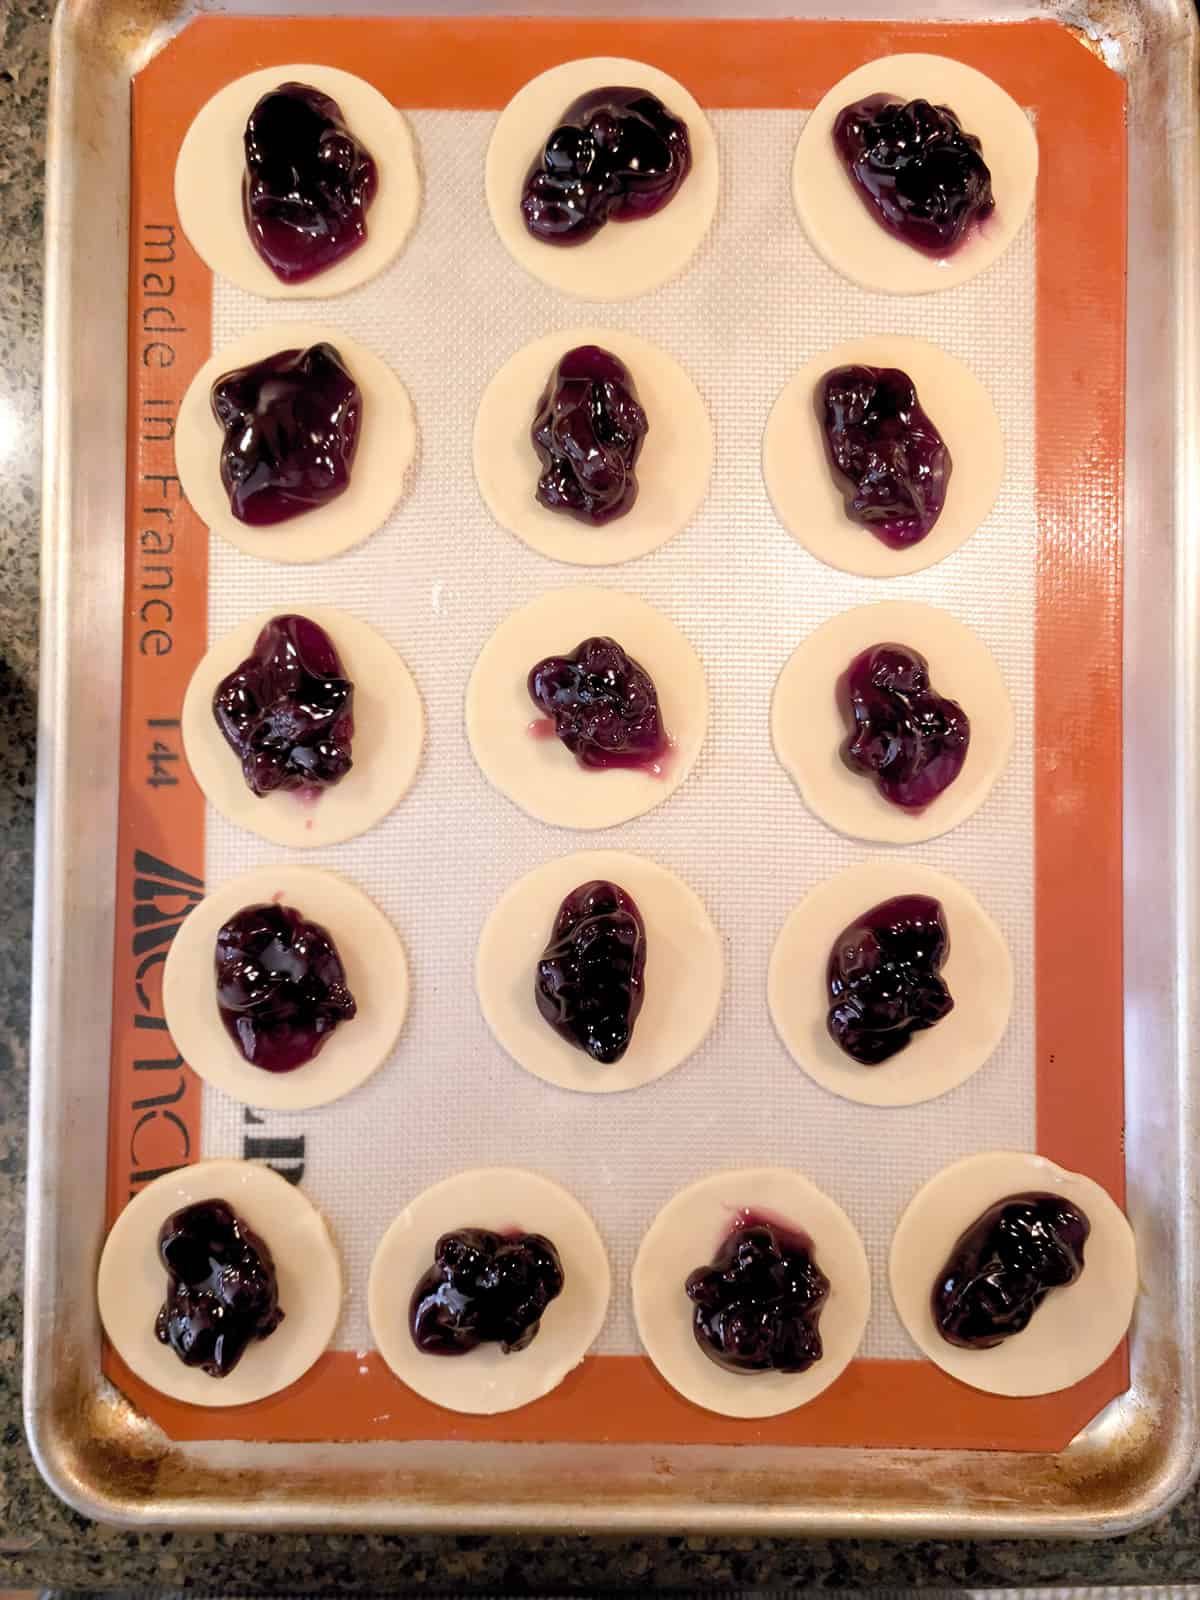 Rounds topped with blueberry pie filling.